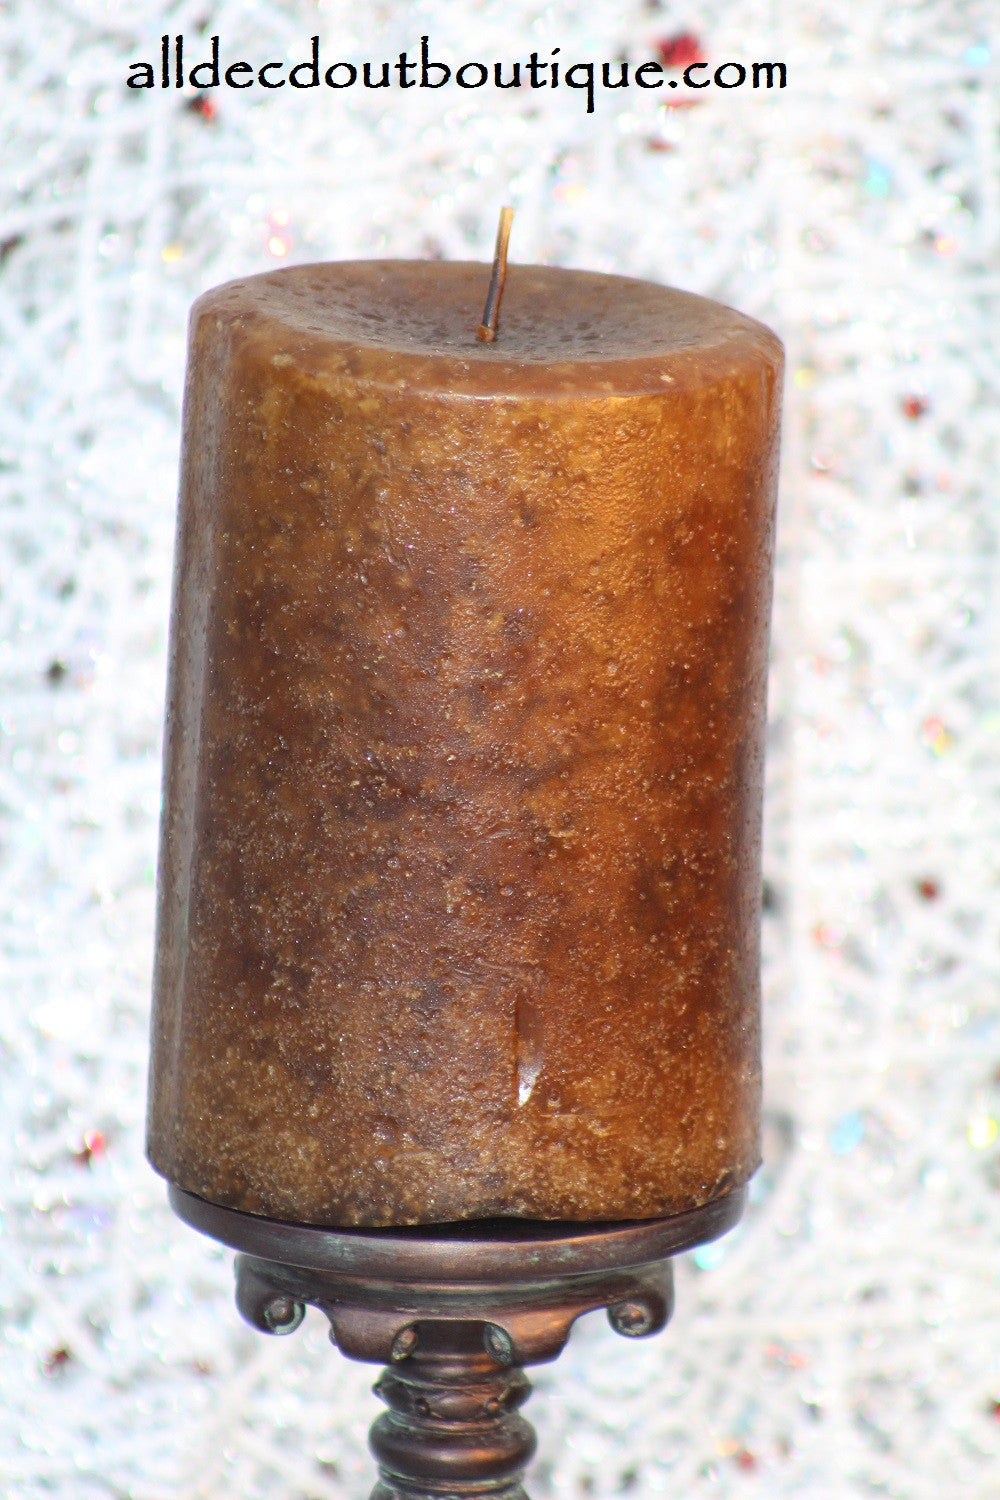 Pillar Candle | American-Candle Wilderness Scented Decor Candle - All Decd Out